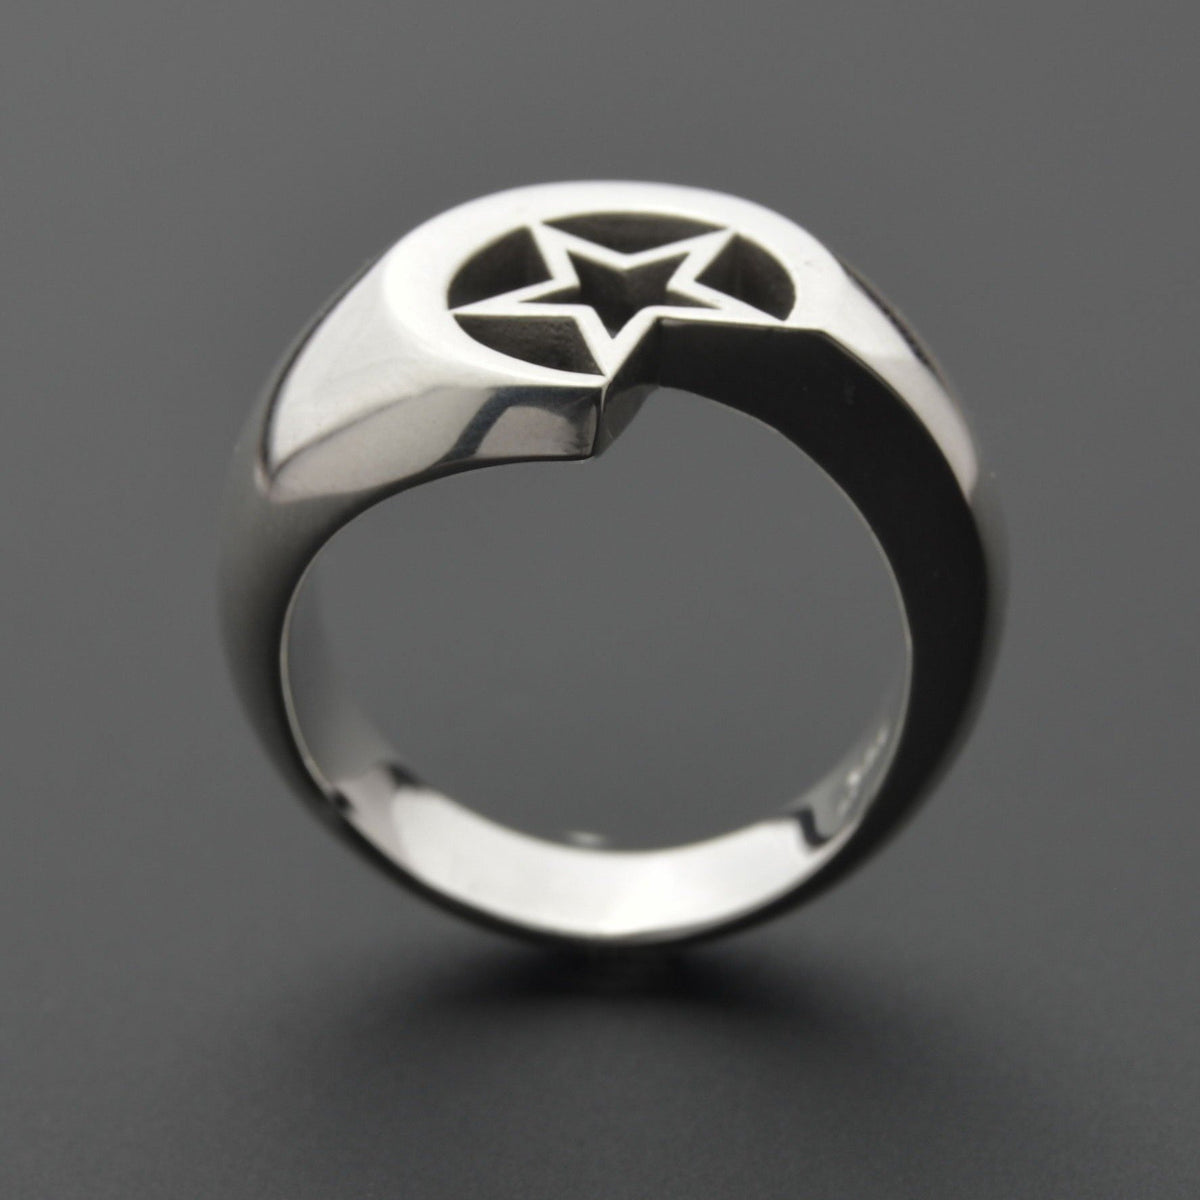 Mystic star and moon ring